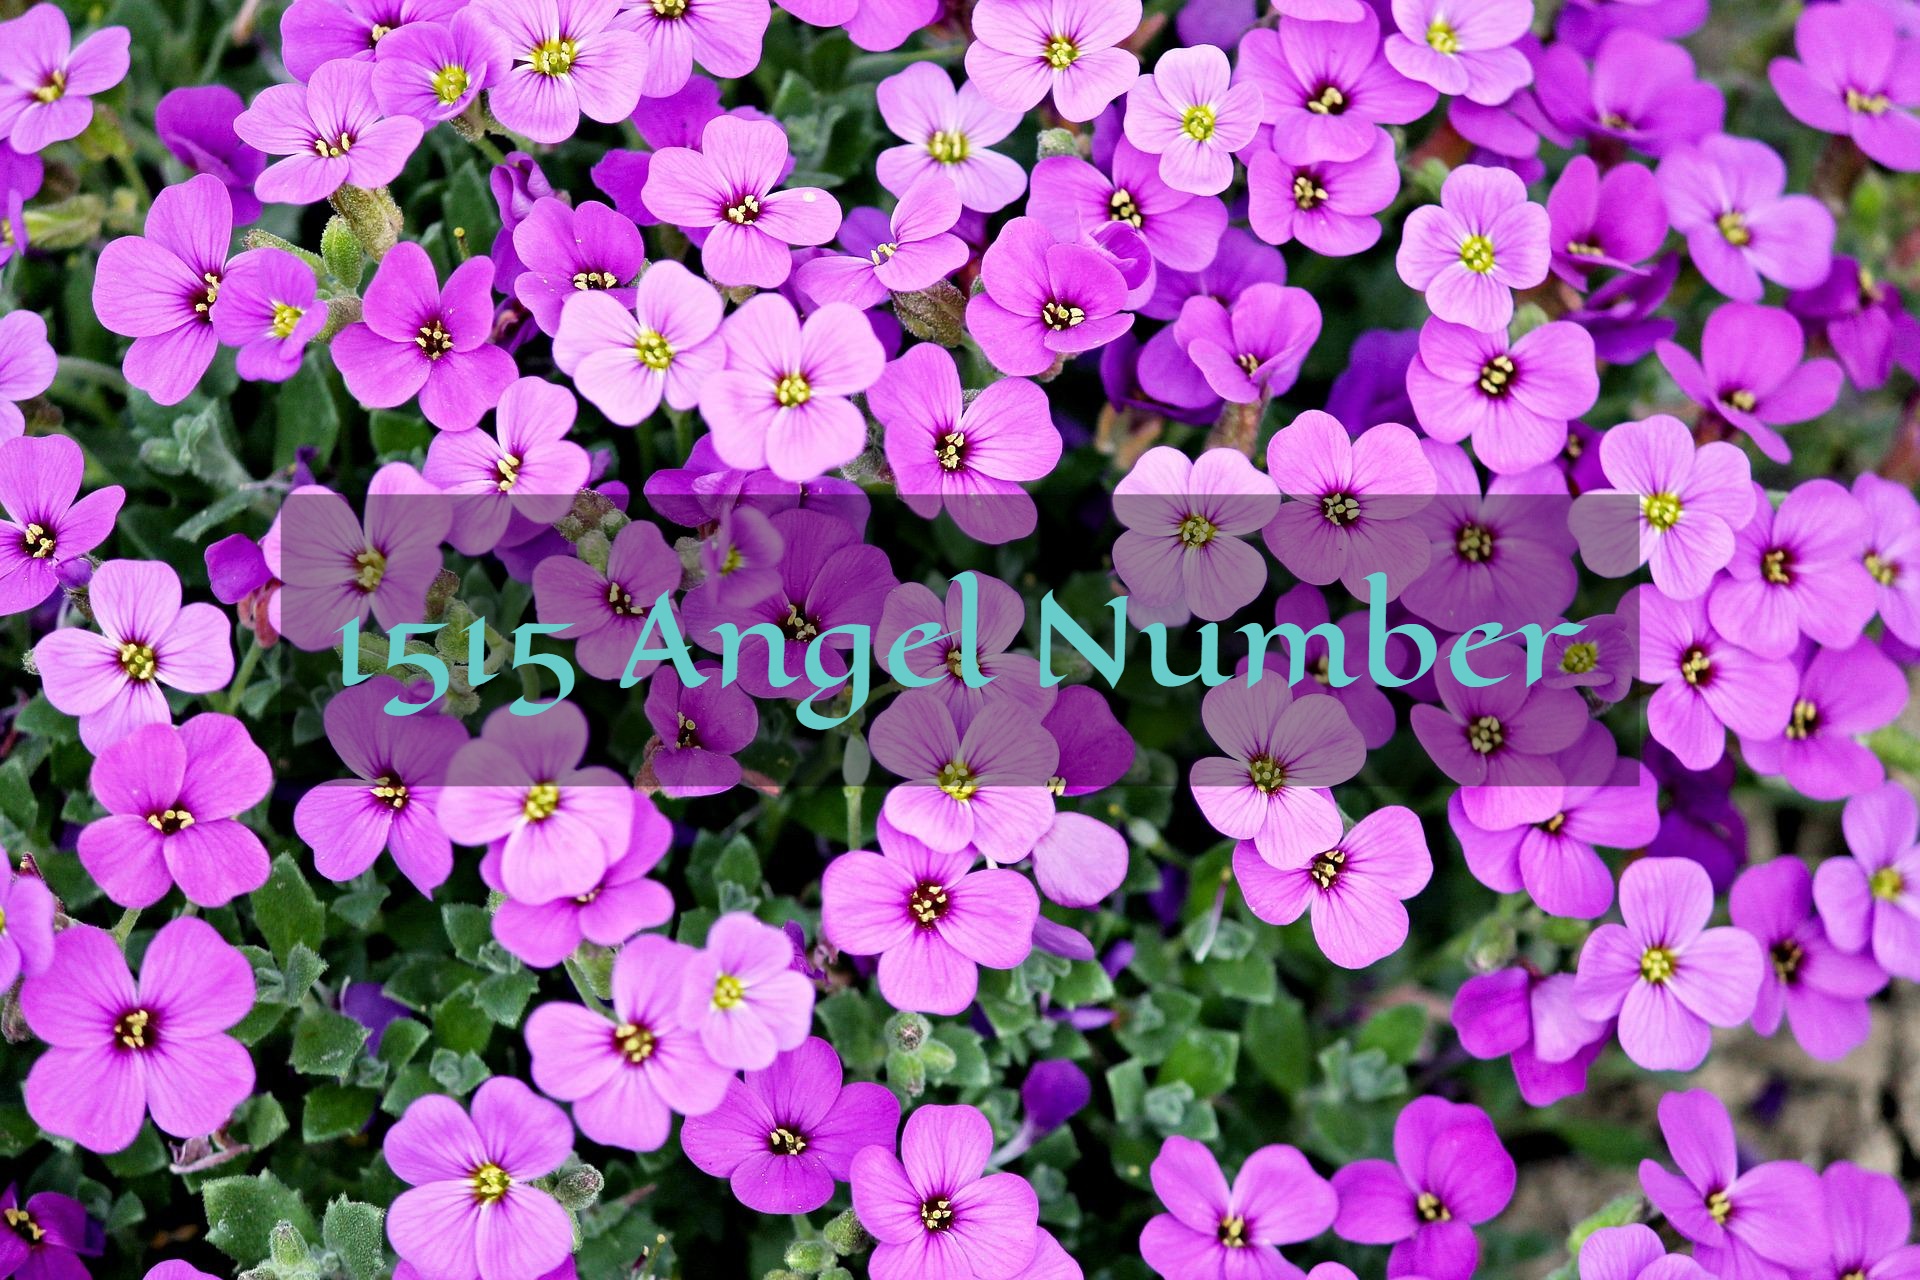 1515 Angel Number - Denotes One's Creativity And Artistry